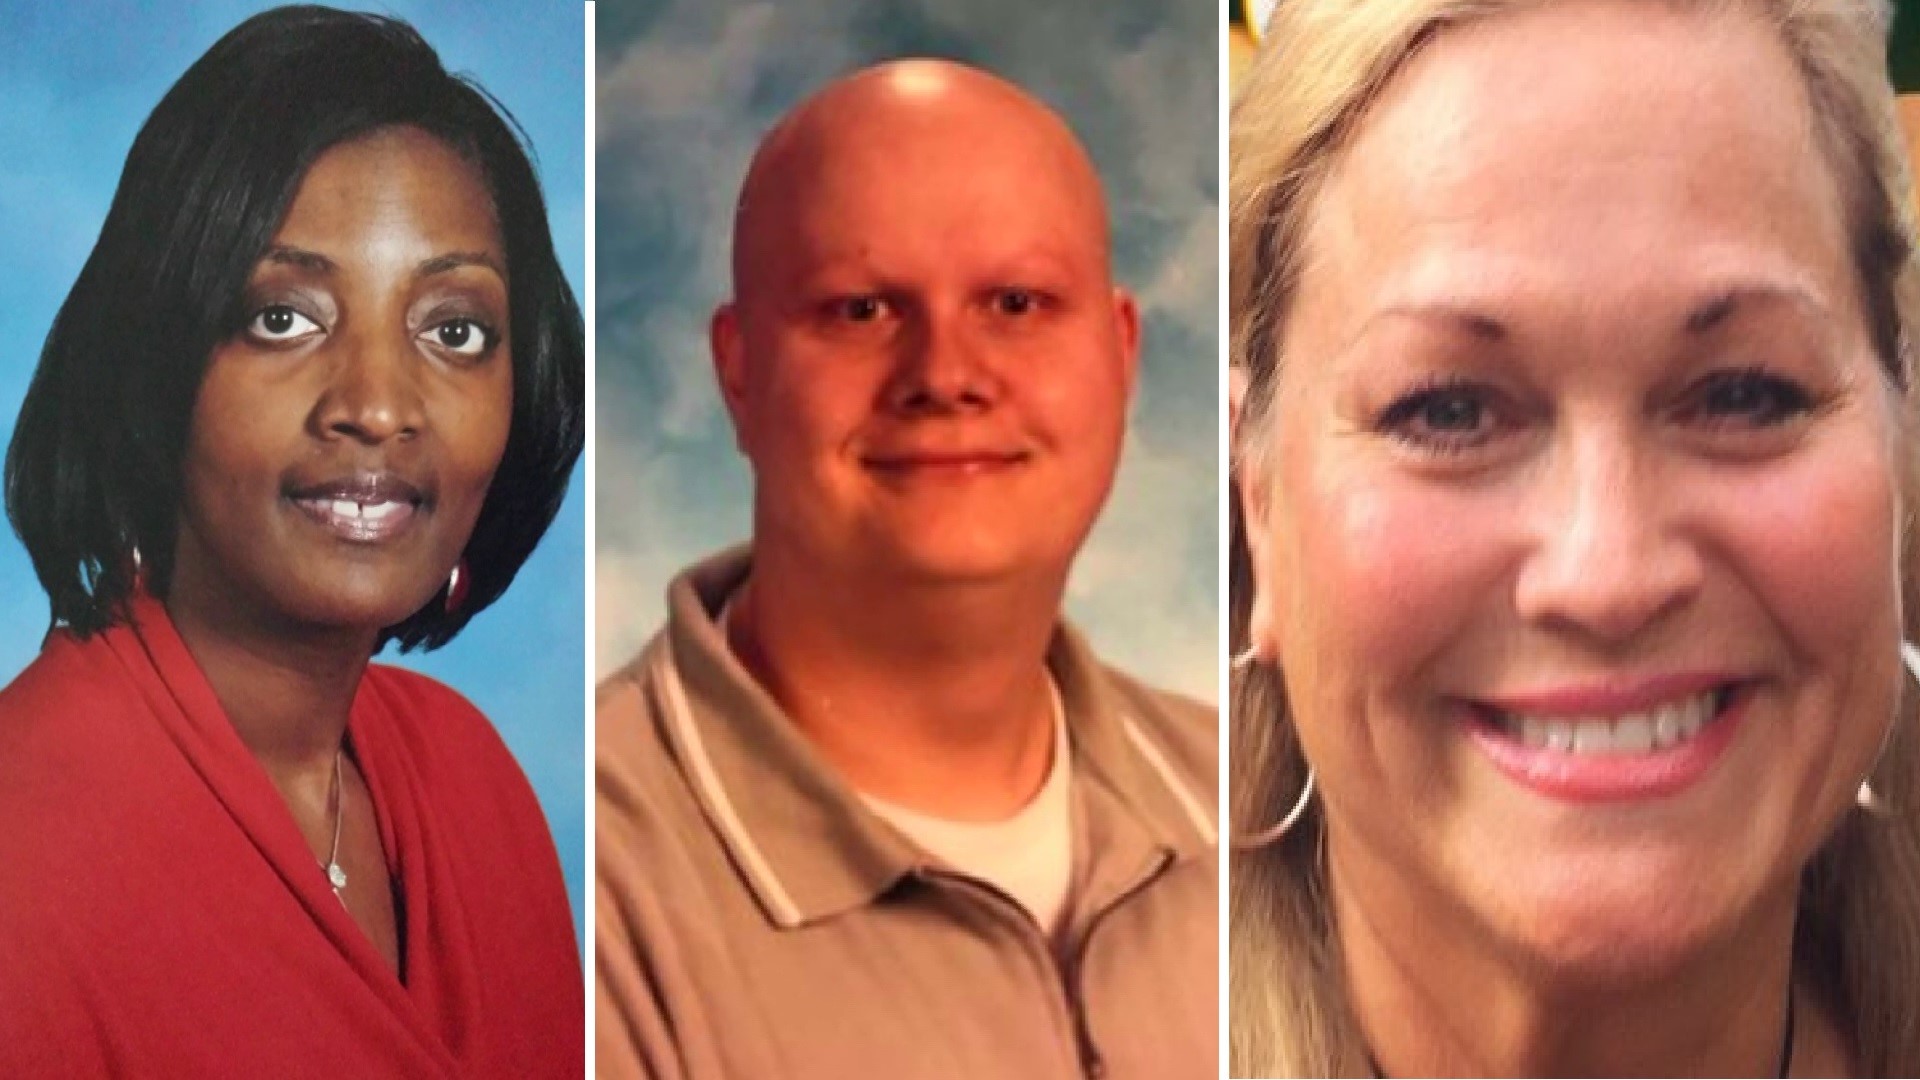 We're speaking to family members and the school system about the deaths of three educators as COVID continues its spread across Georgia.